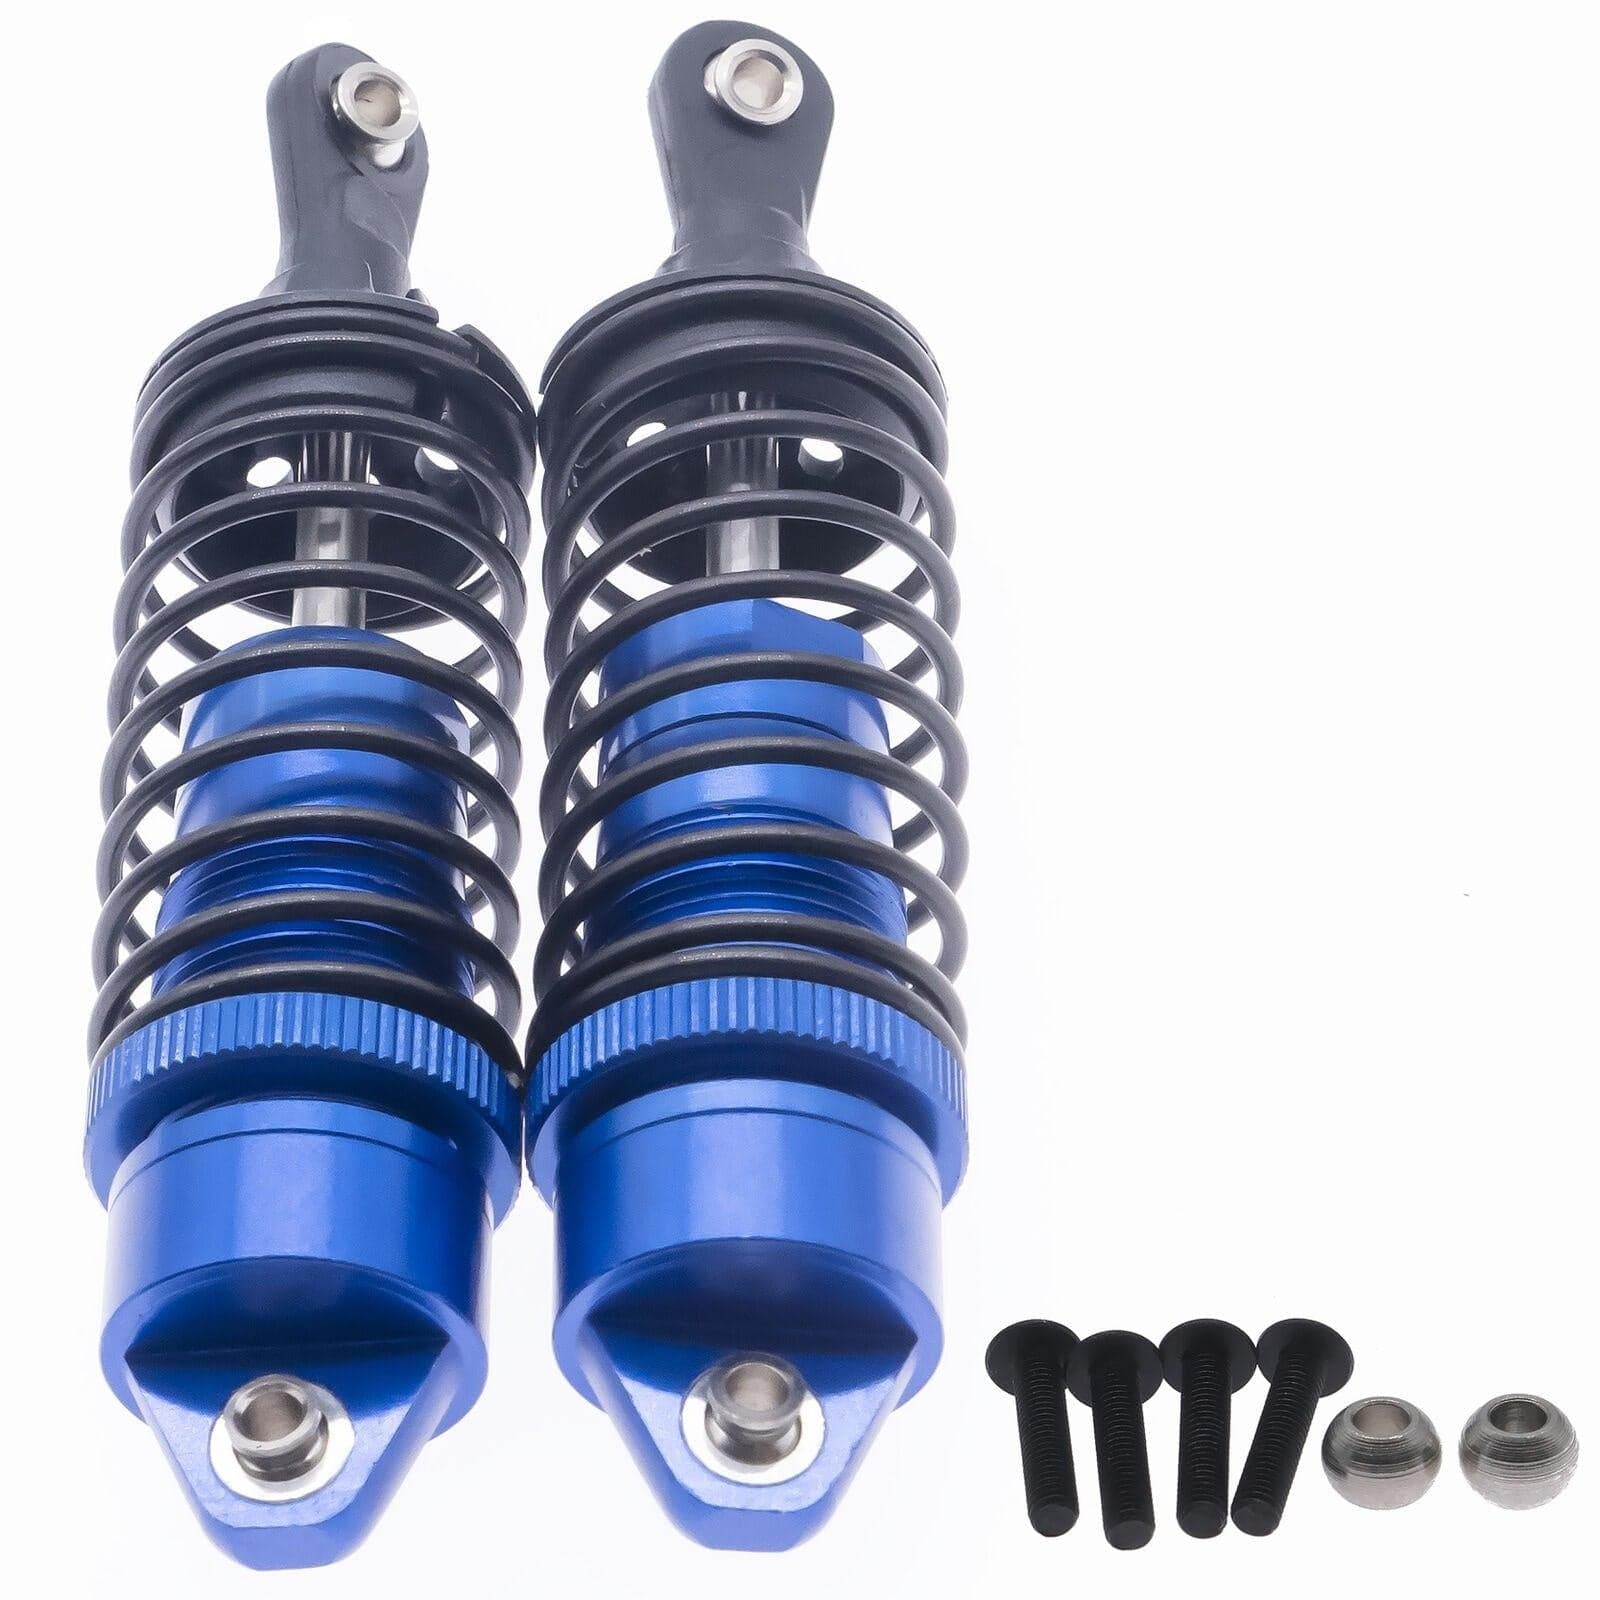 RCAWD ECX UPGRADE PARTS Dark Blue RCAWD Front Shock Absorber For RC Car 1/10 Horizon ECX 2WD Series Ruckus Axe MT